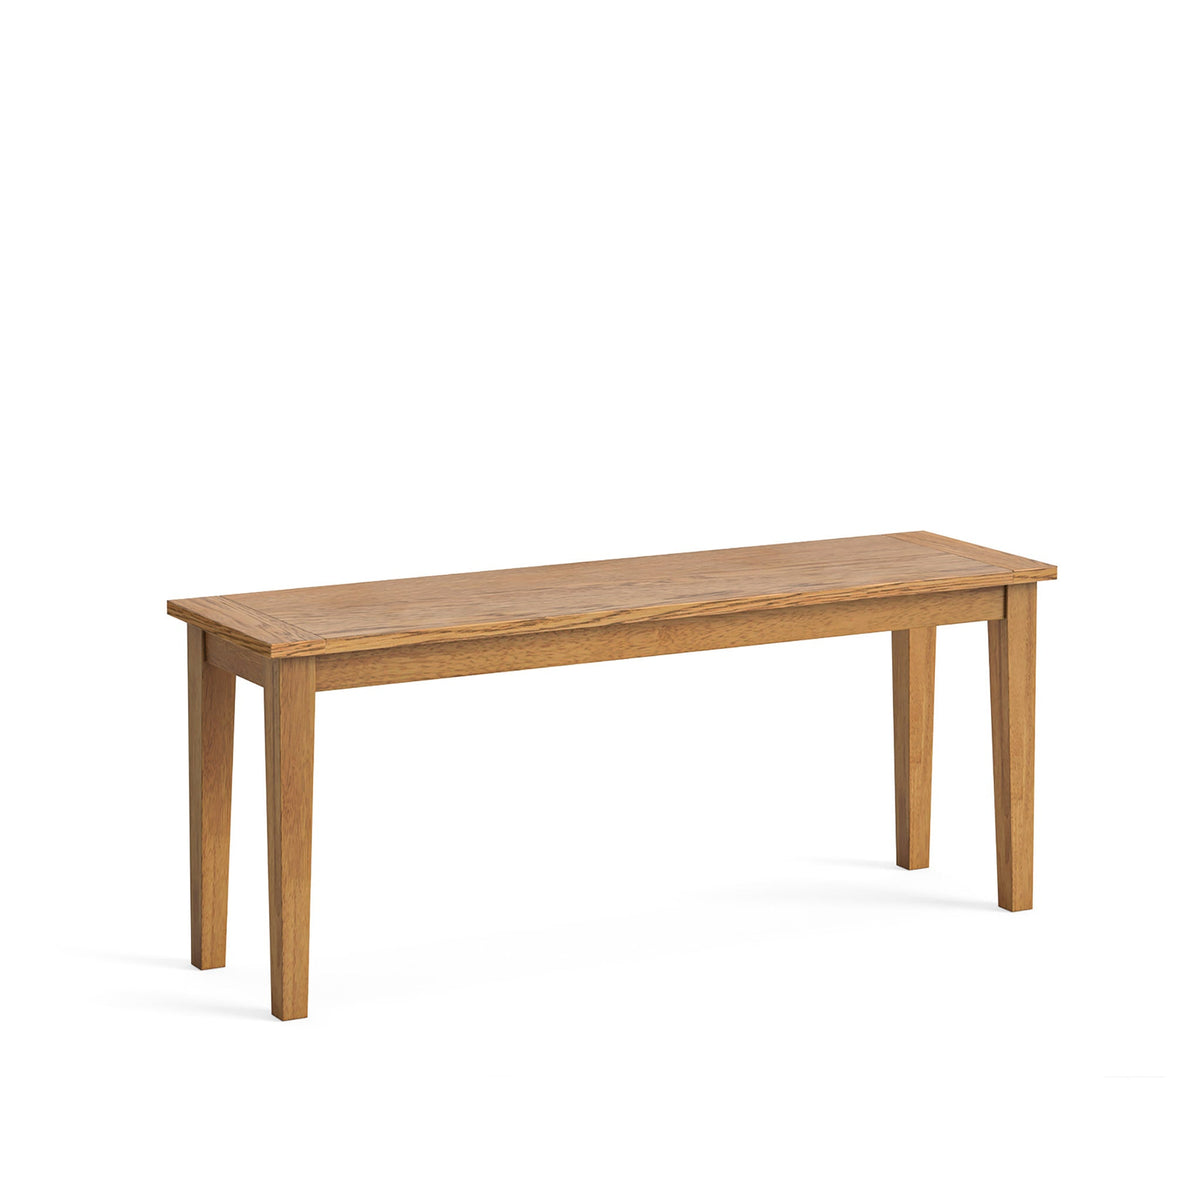 Fran Oak Wooden Dining Benches